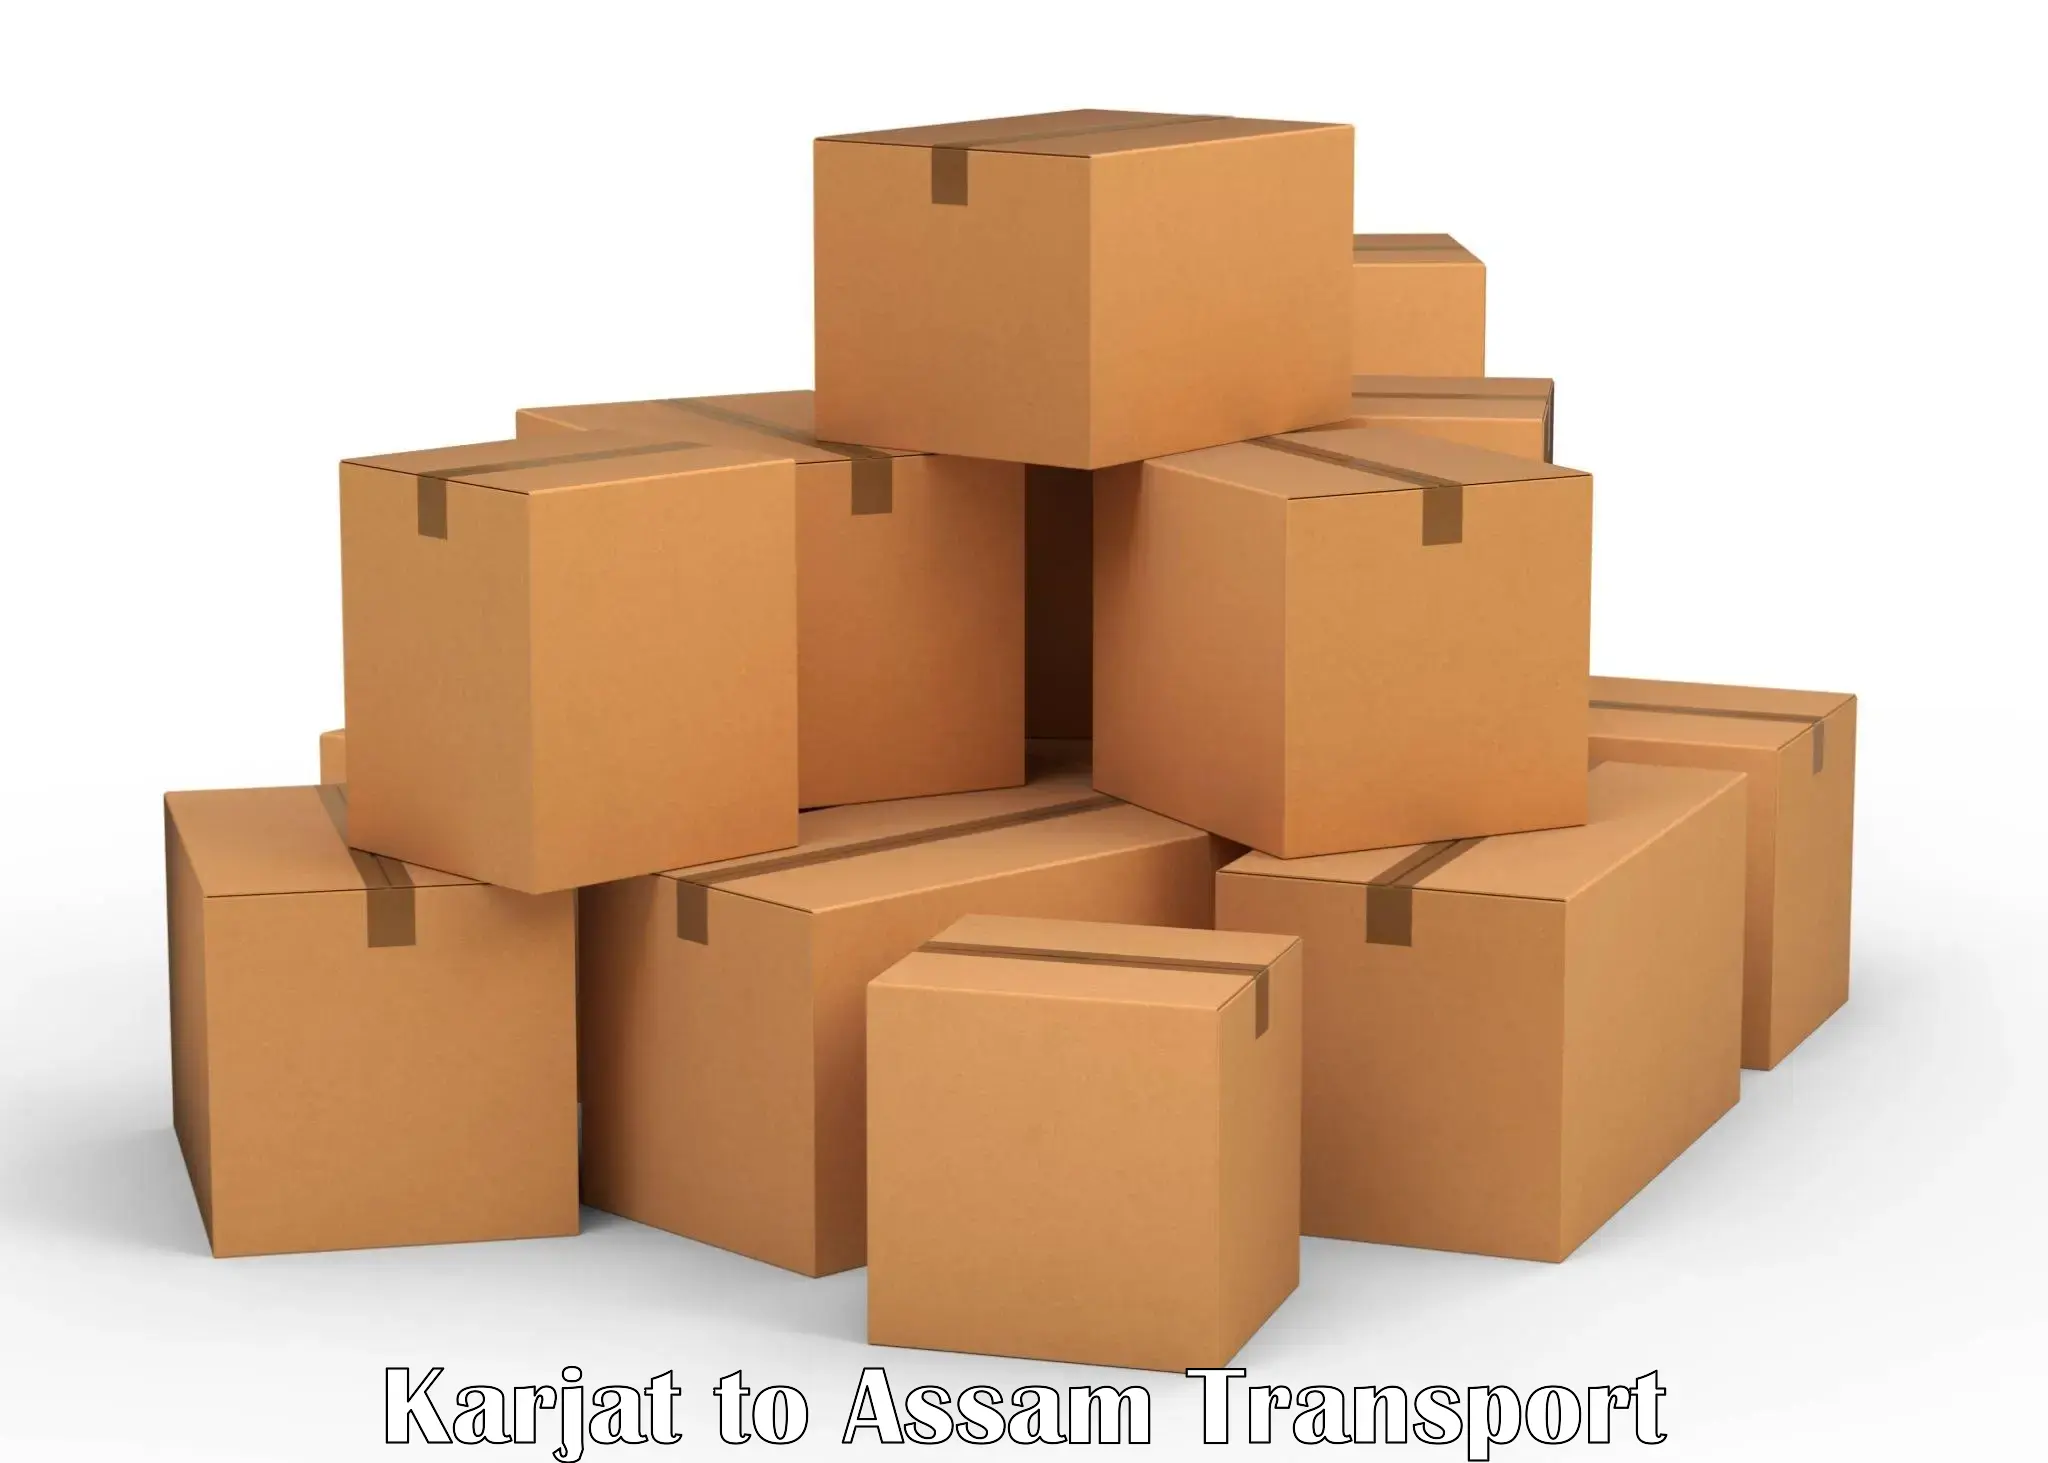 Container transport service Karjat to Assam